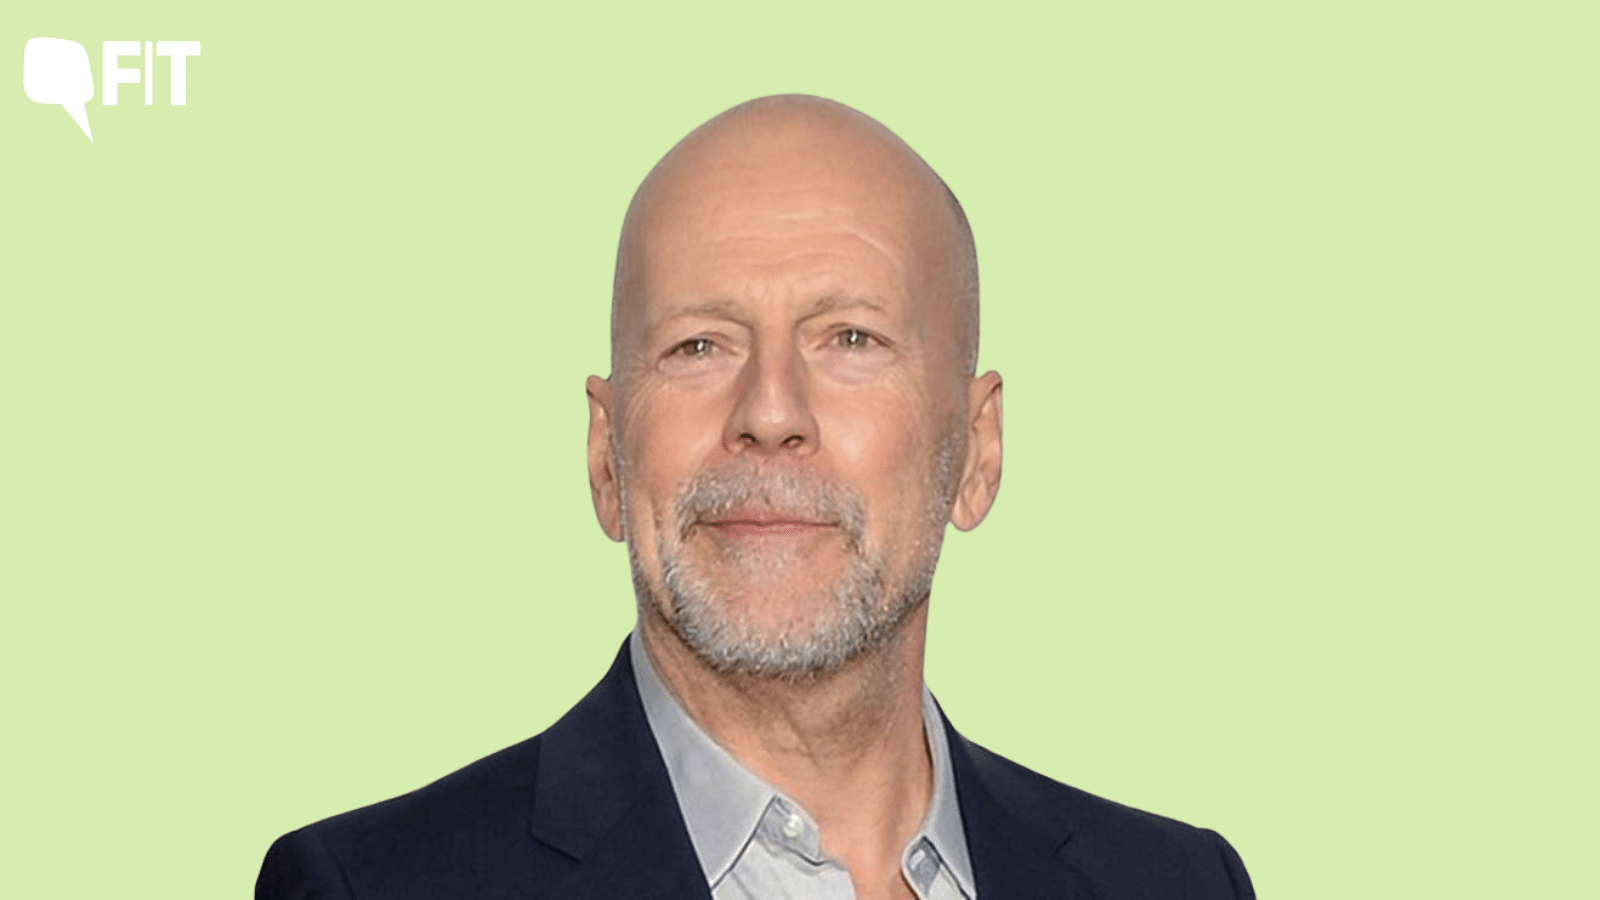 <div class="paragraphs"><p>Actor Bruce Willis (67) has been diagnosed with frontotemporal dementia, his family announced in a statement.</p></div>